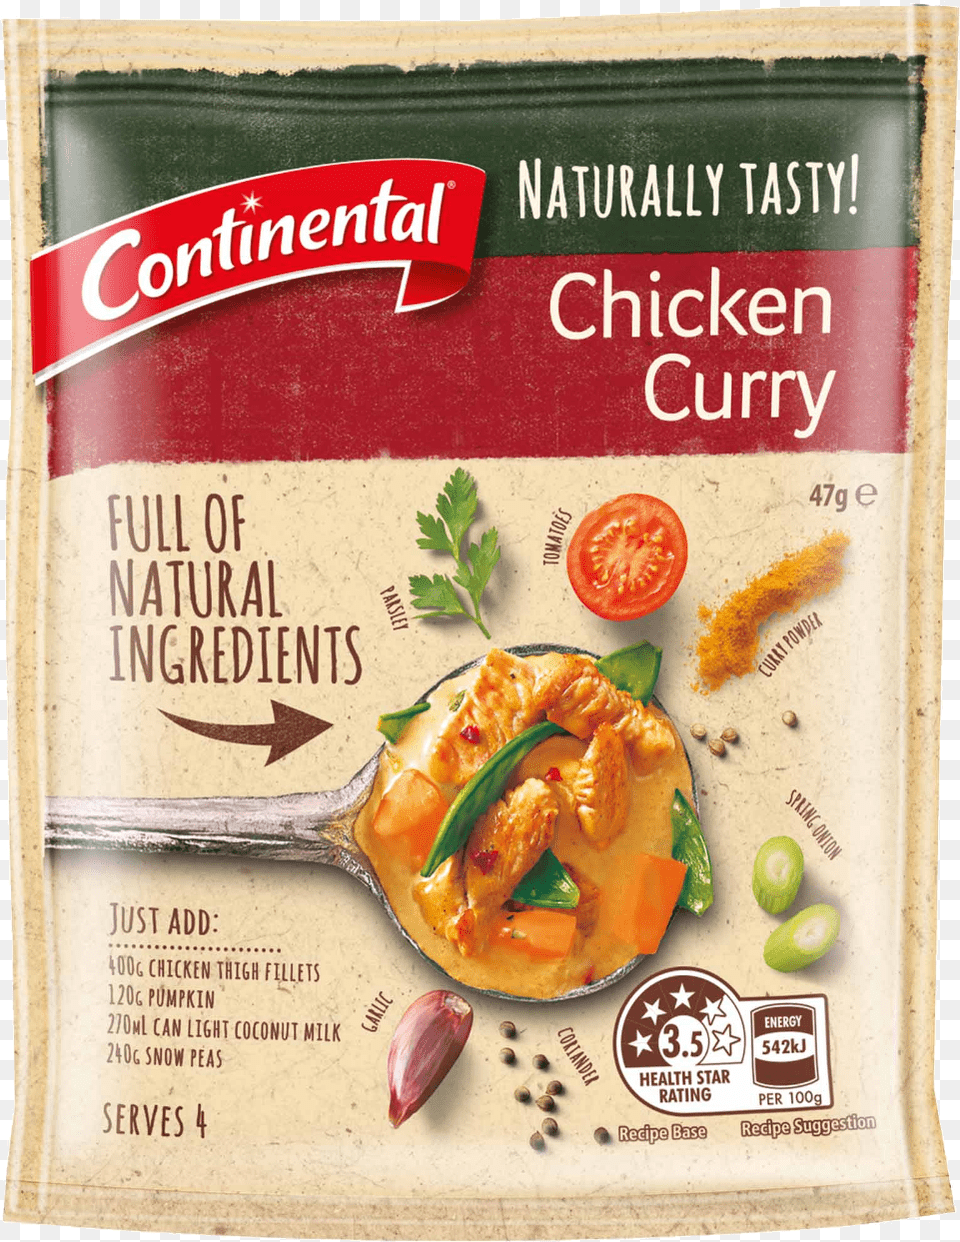 Naturally Tasty Chicken Curry Naturally Tasty Chilli Con Carne, Publication, Food Presentation, Food, Book Png